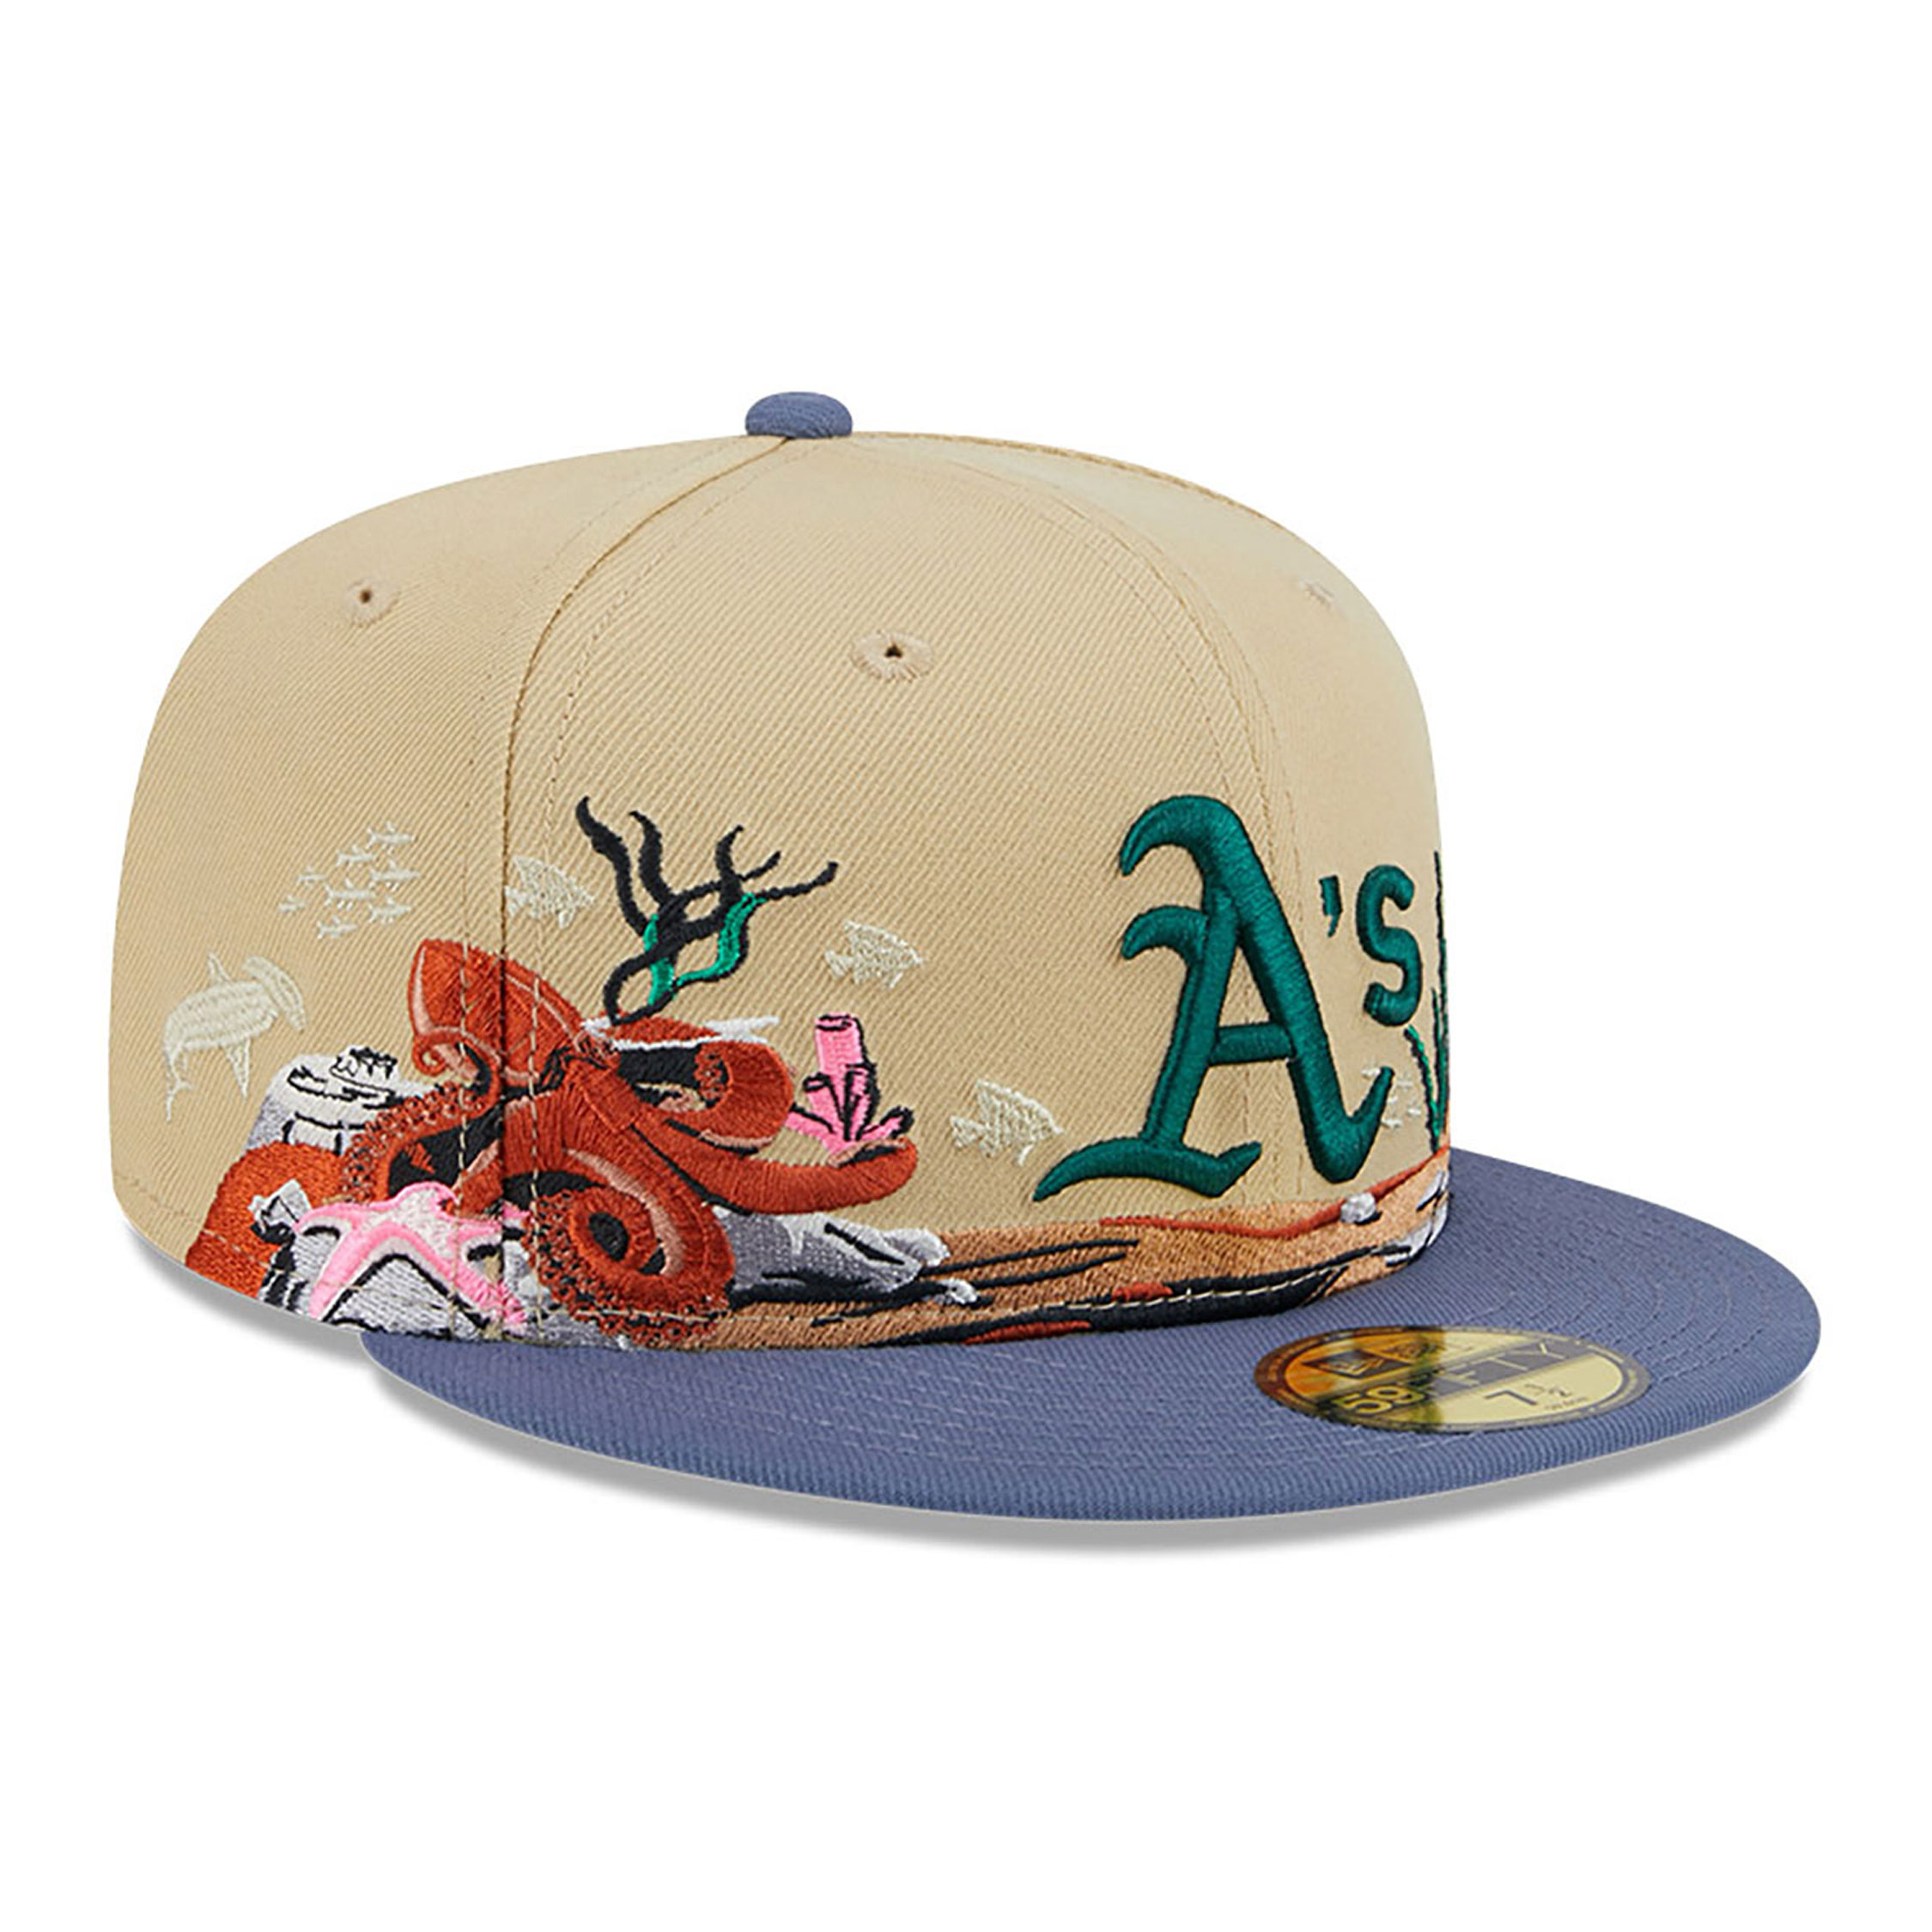 Oakland Athletics Team Landscape Light Beige 59FIFTY Fitted Cap